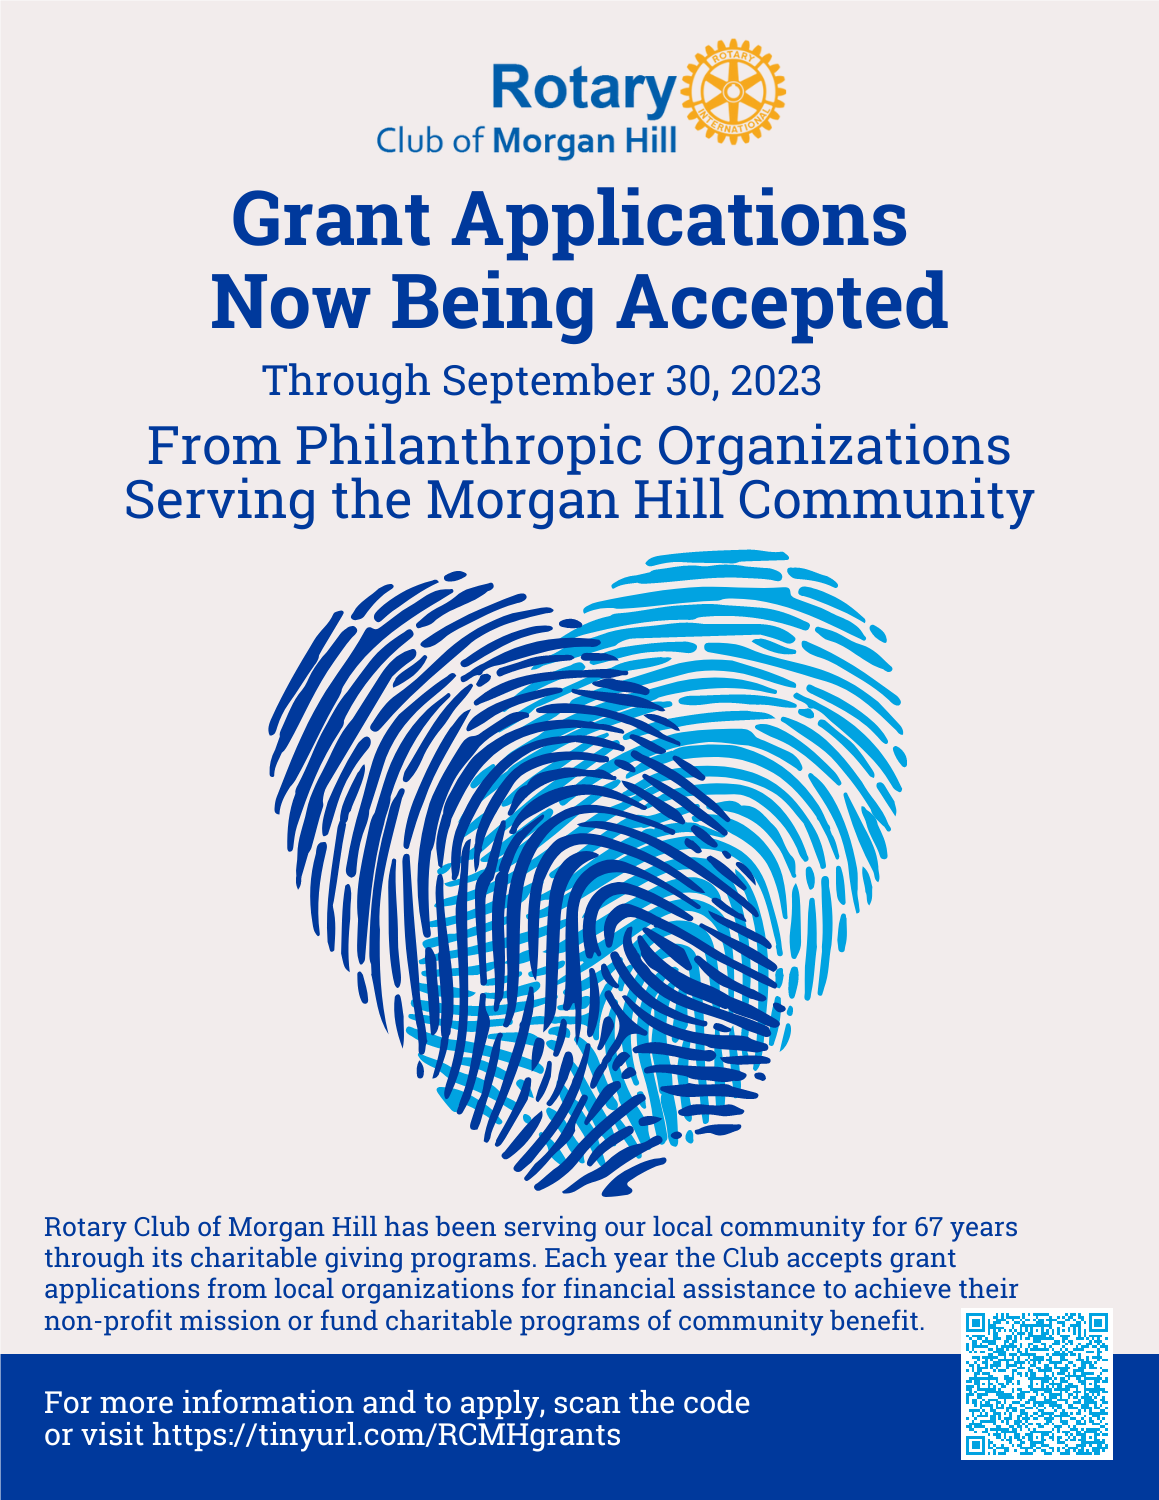 Grant application now being accepted